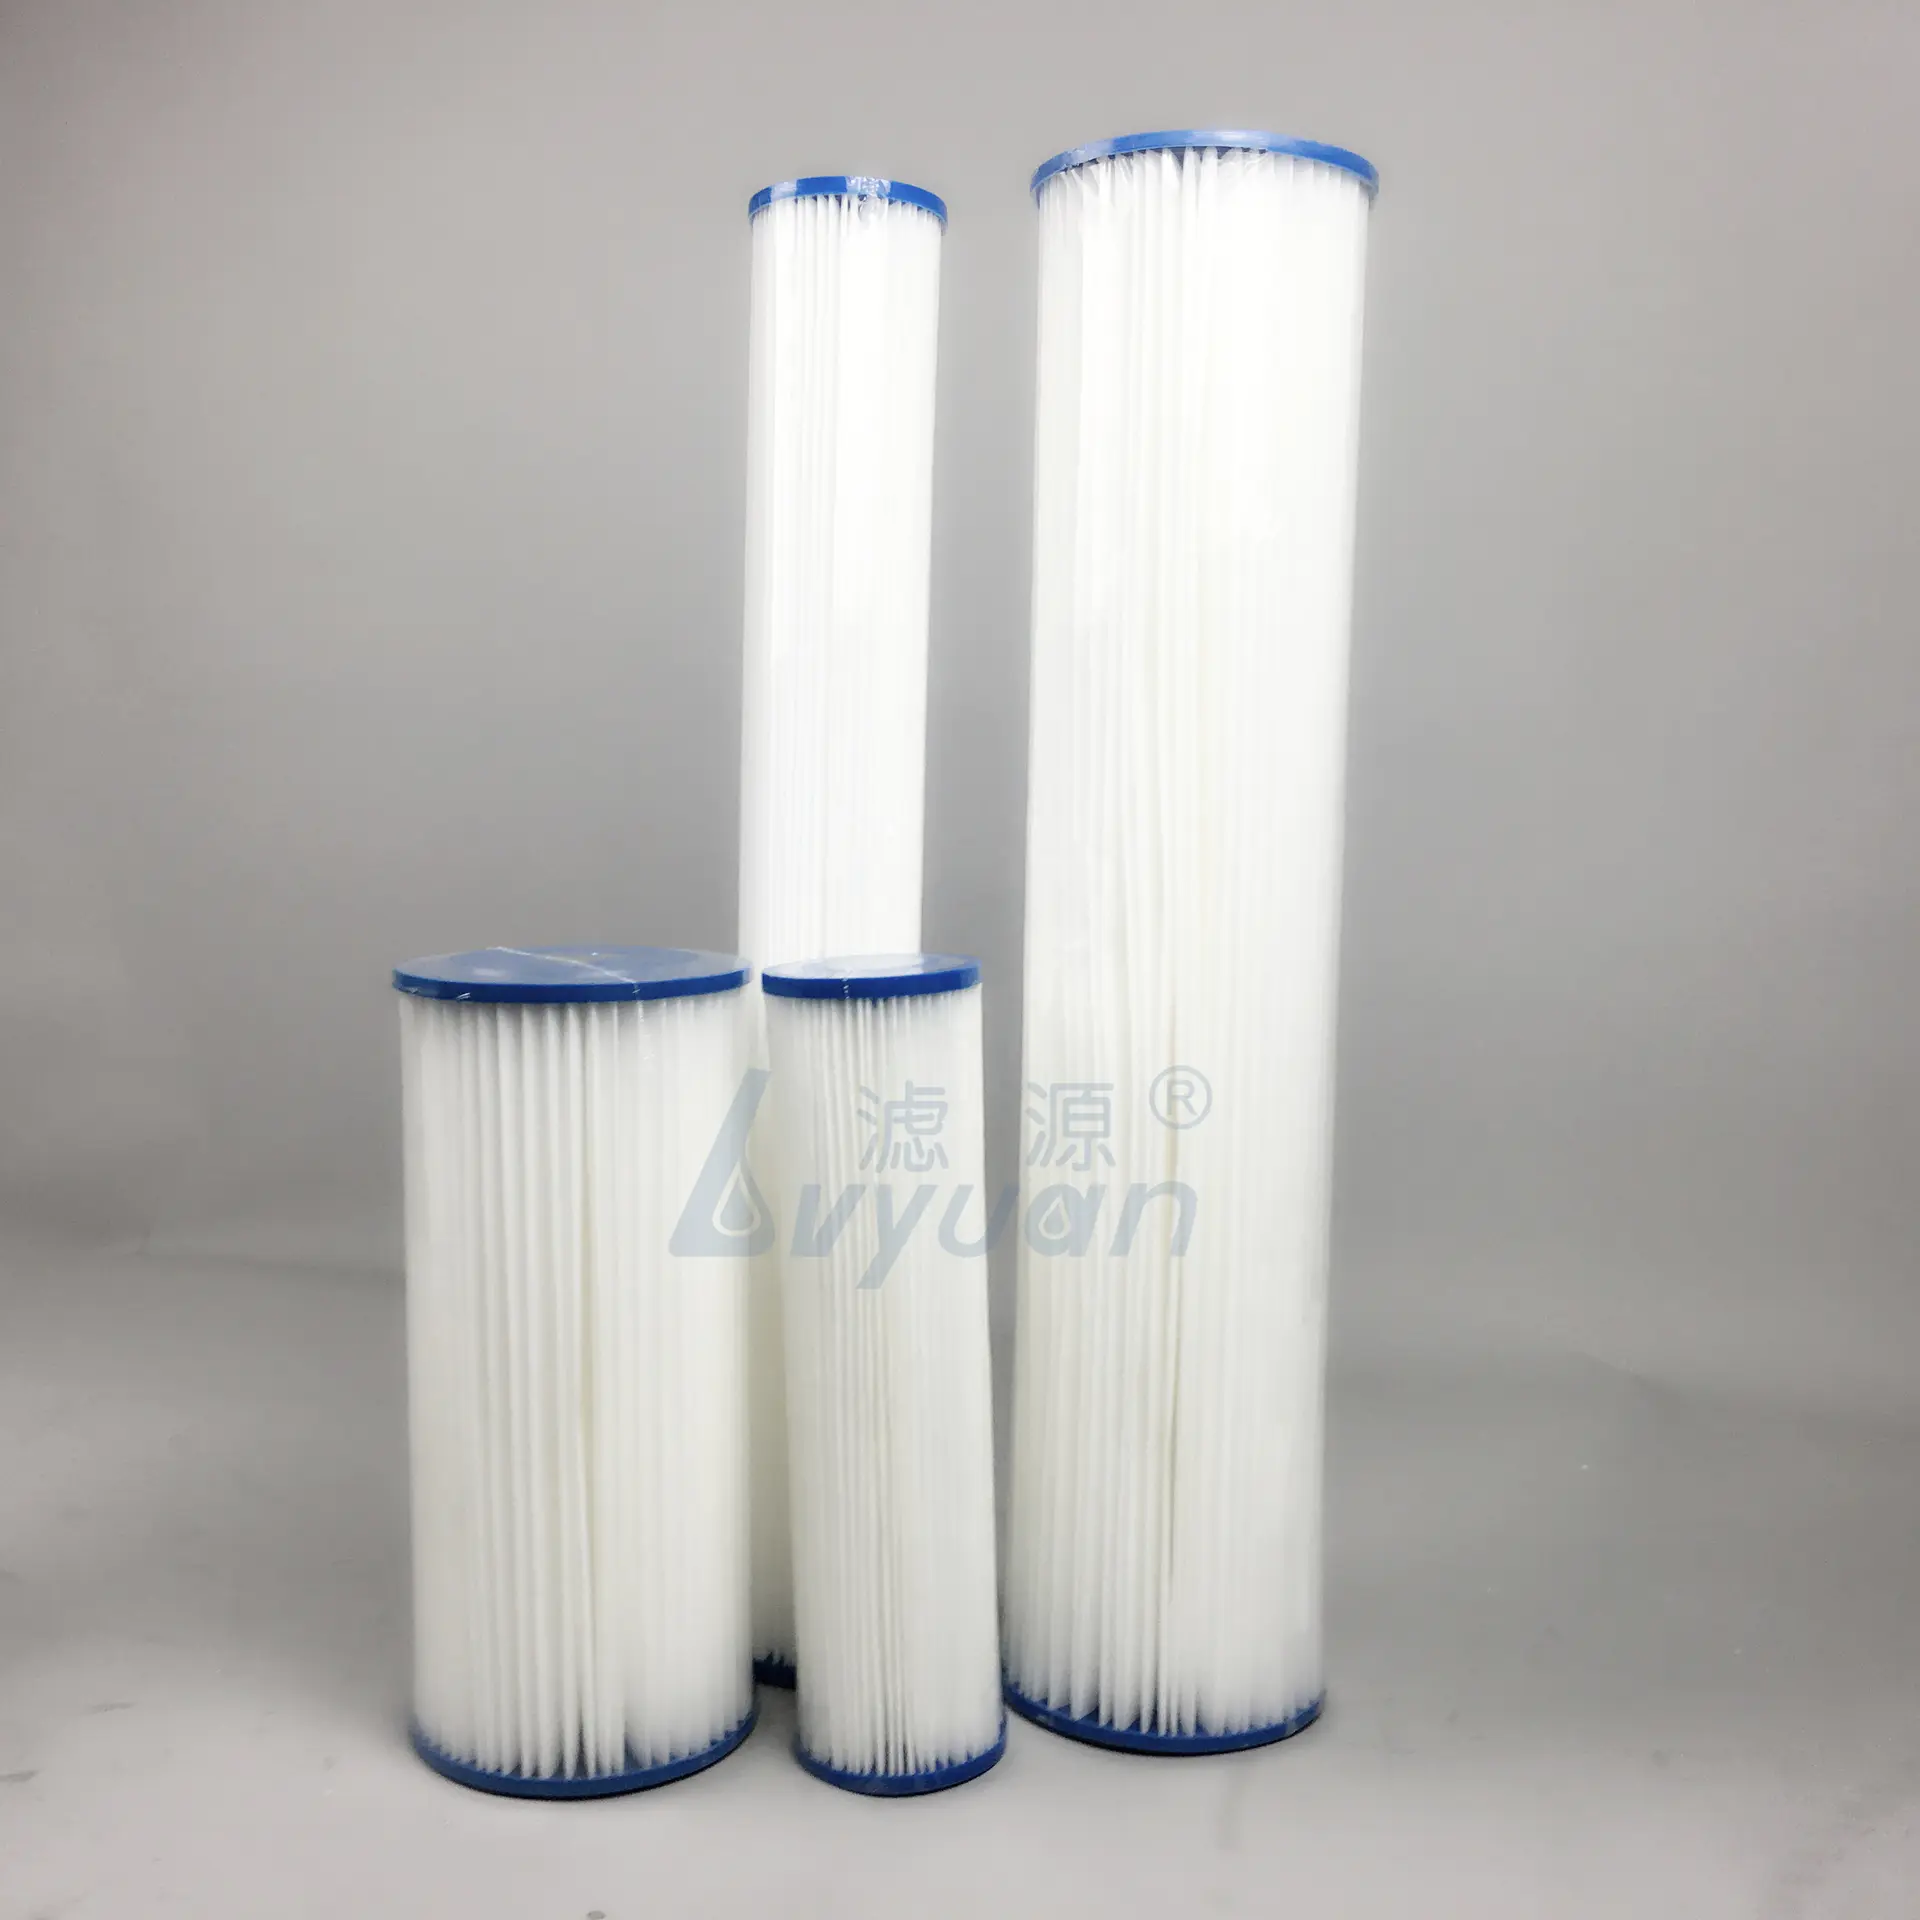 paper pleated water cartridge Pool/Spa replacement cartridge filter for swimming pool/hot tub spa filtration system